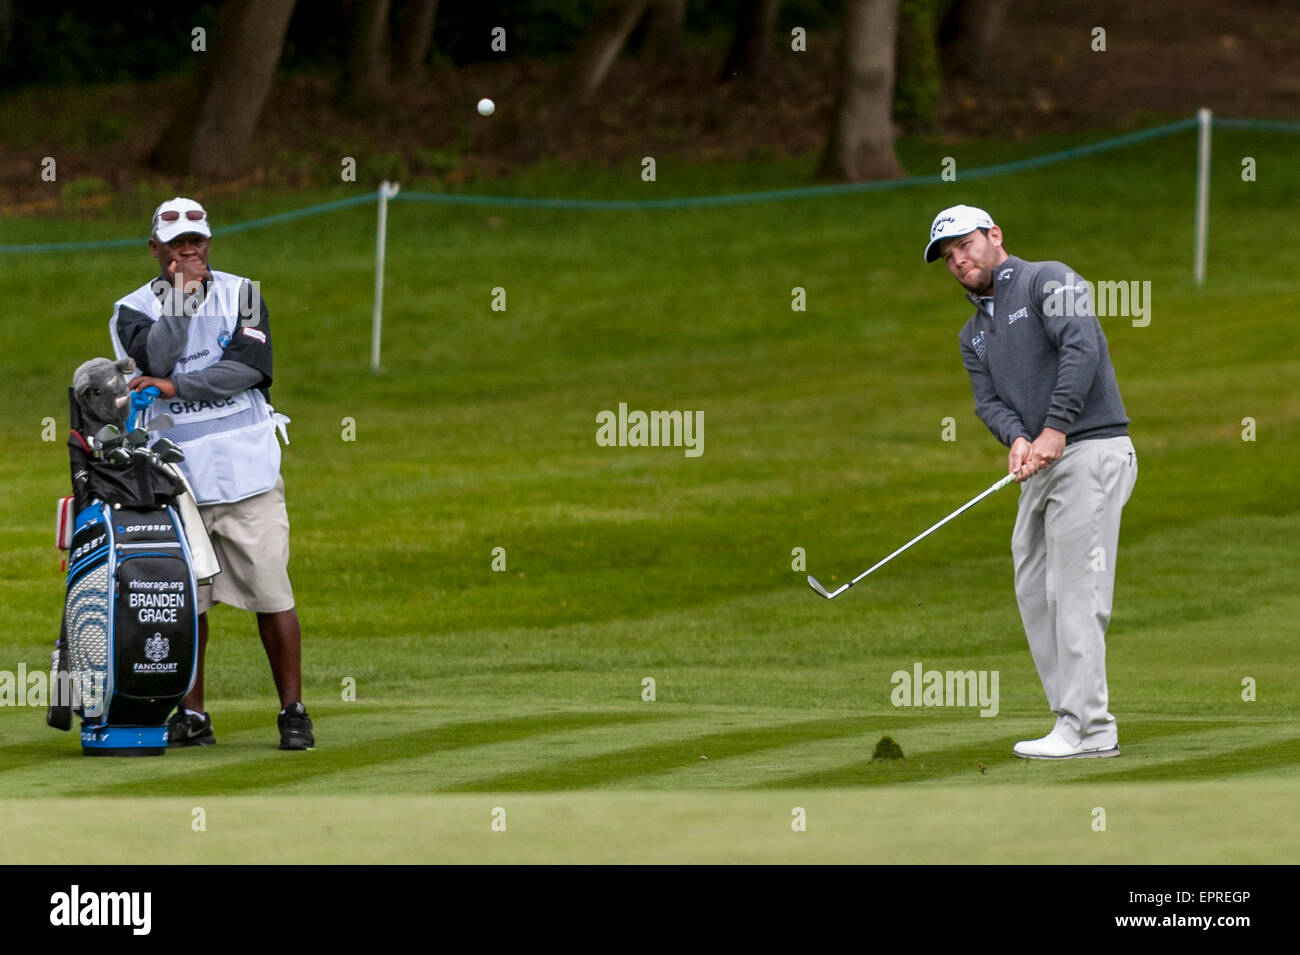 London, UK. 20 May 2015.  Brandon Grace (South Africa) chipping during the BMW PGA Championship 2015 Pro-Am at Wentworth club, Surrey. Credit:  Stephen Chung / Alamy Live News Stock Photo